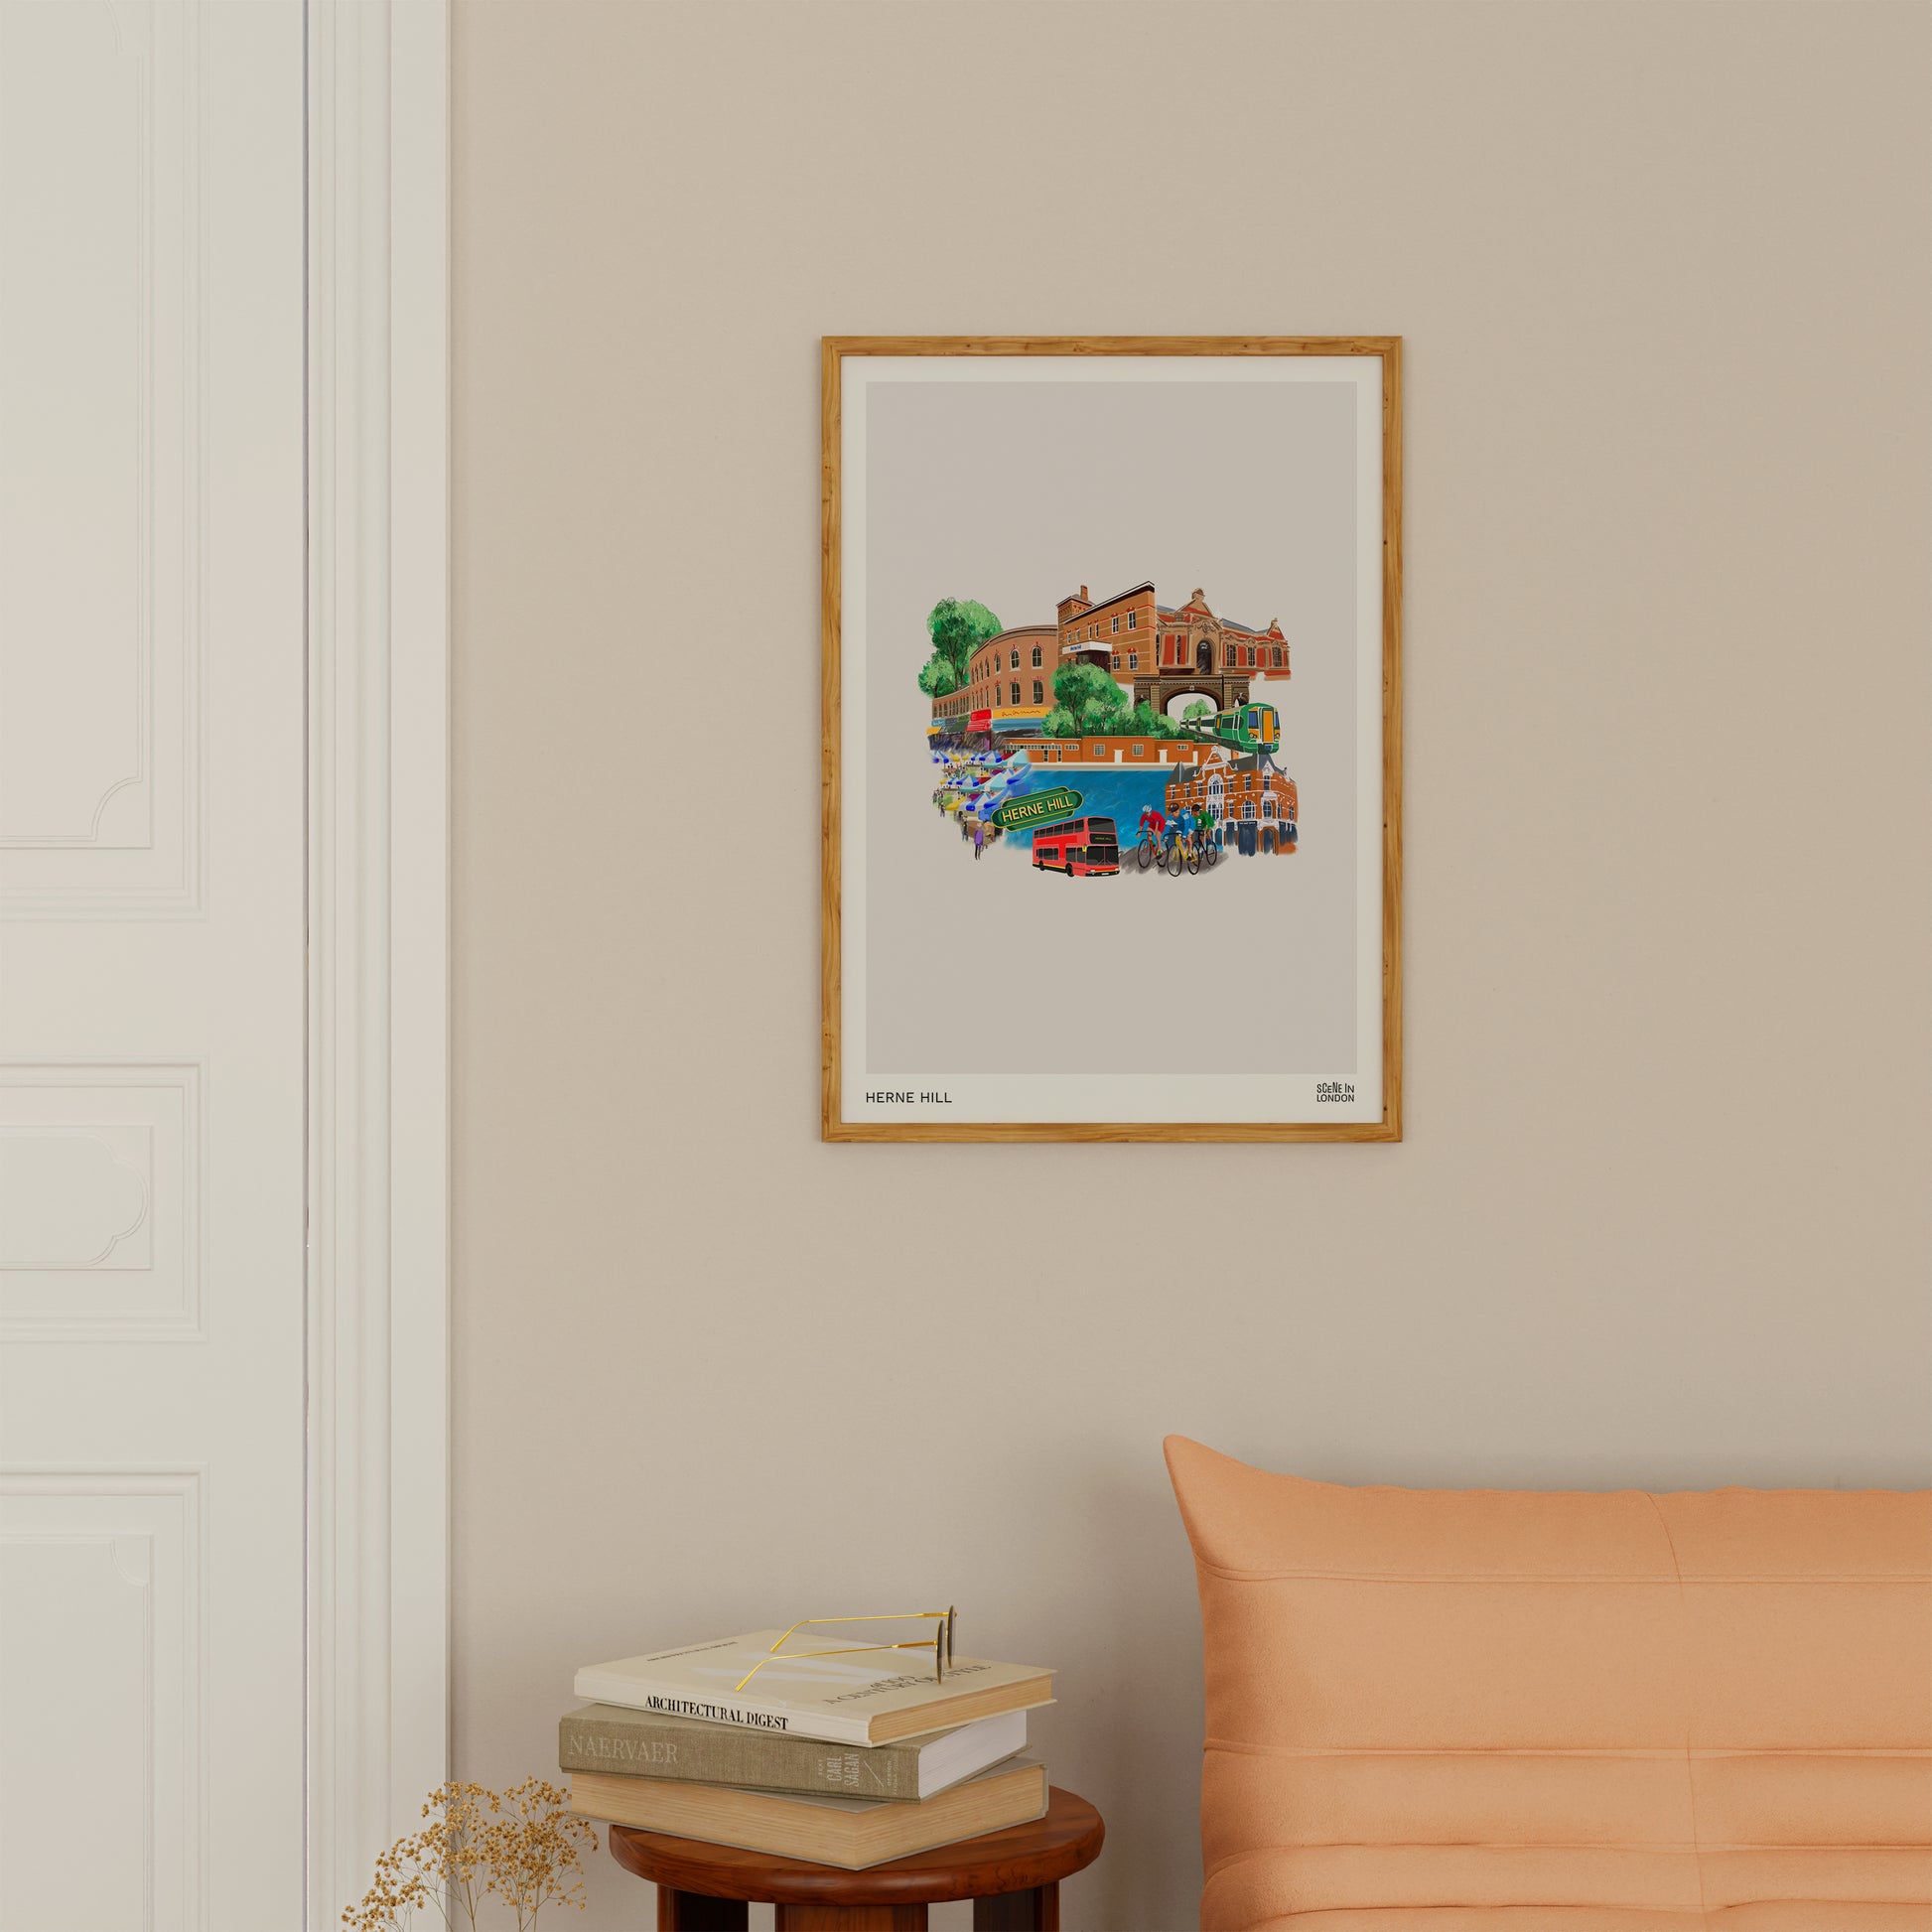 Herne Hill London art print in Herne Hill home